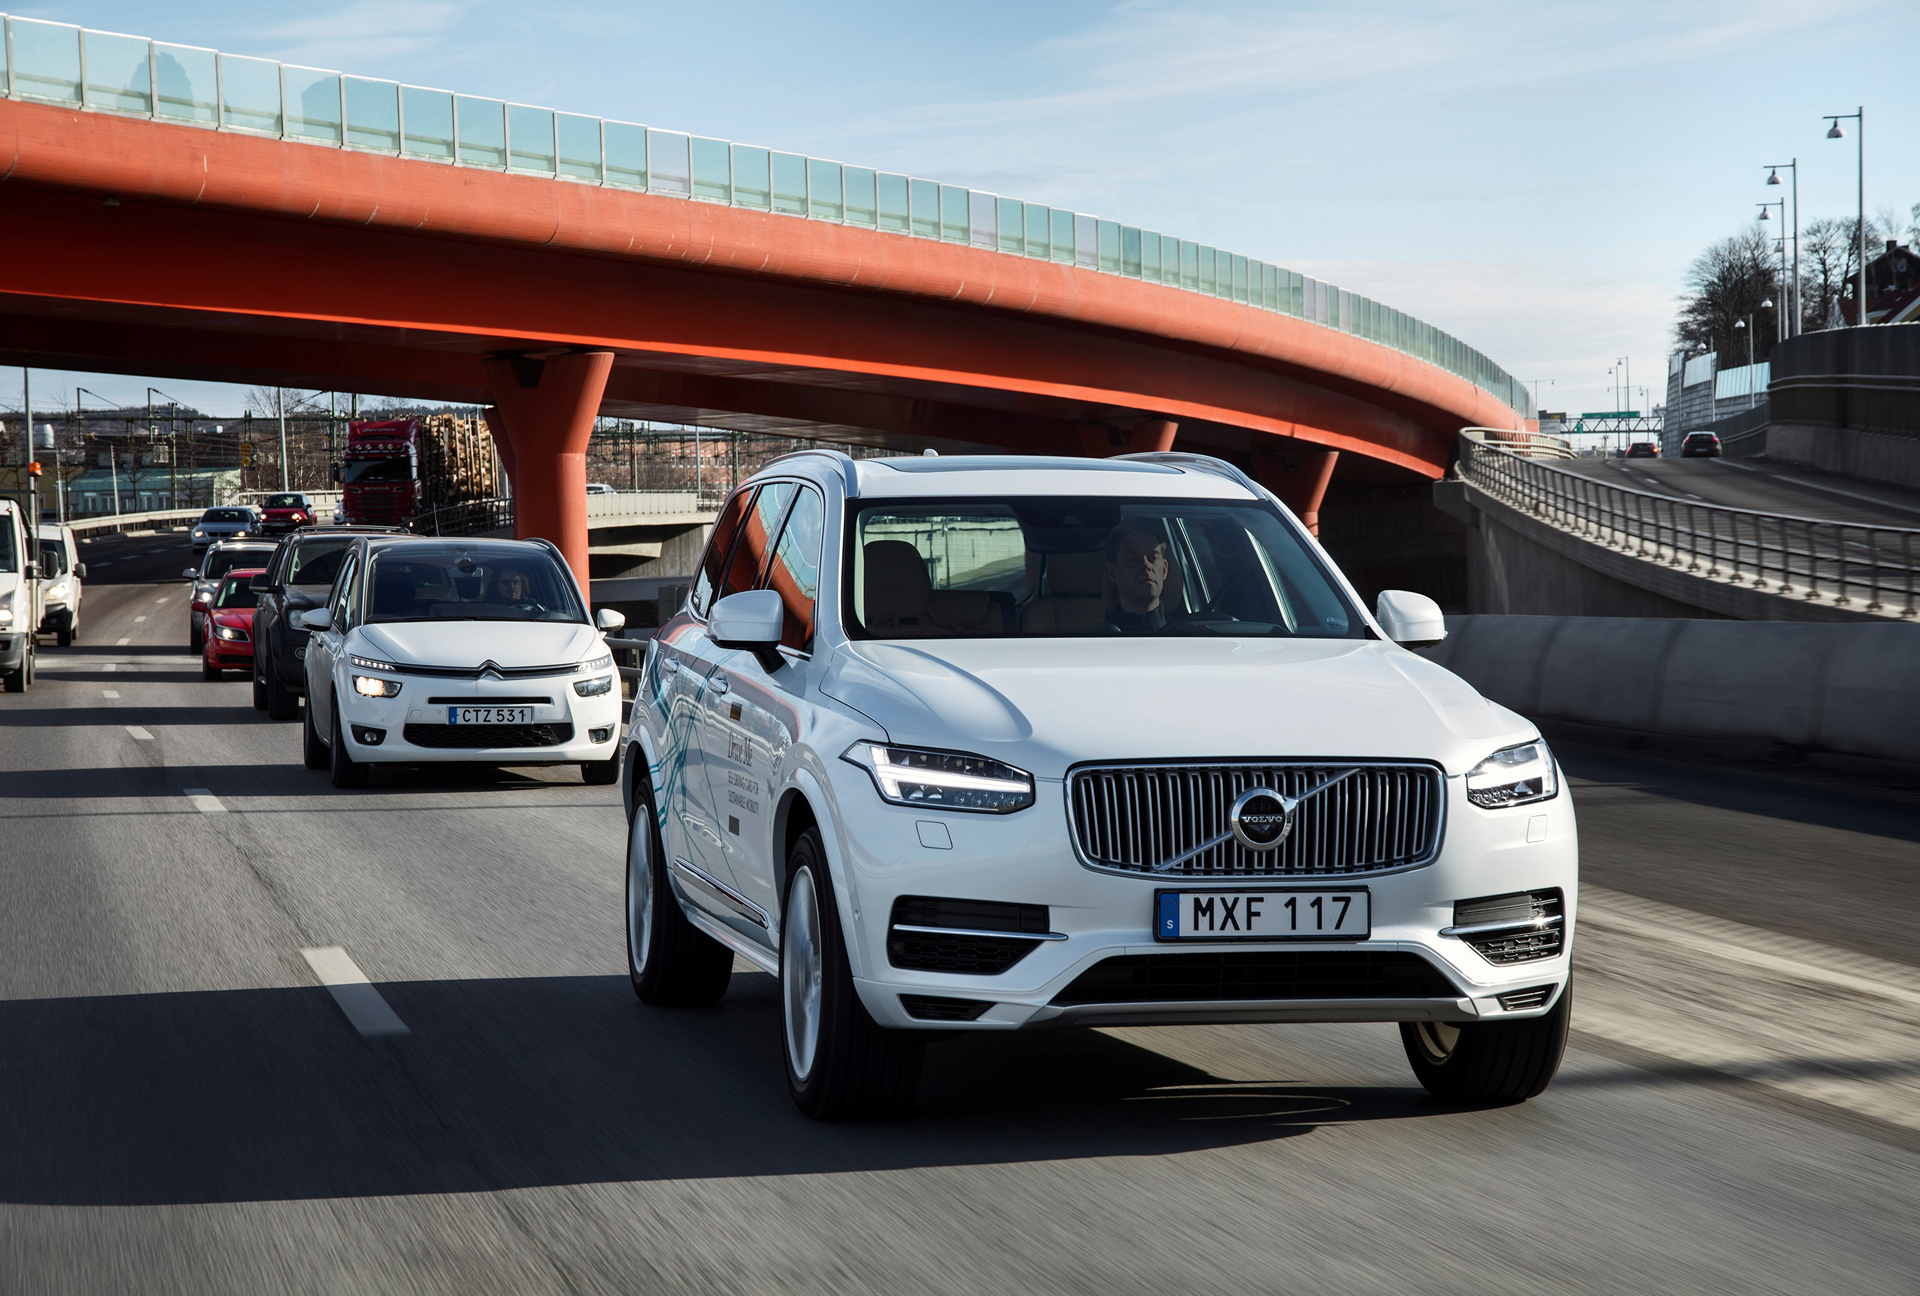 Volvo XC90 Drive Me test vehicle © Zhejiang Geely Holding Group Co., Ltd